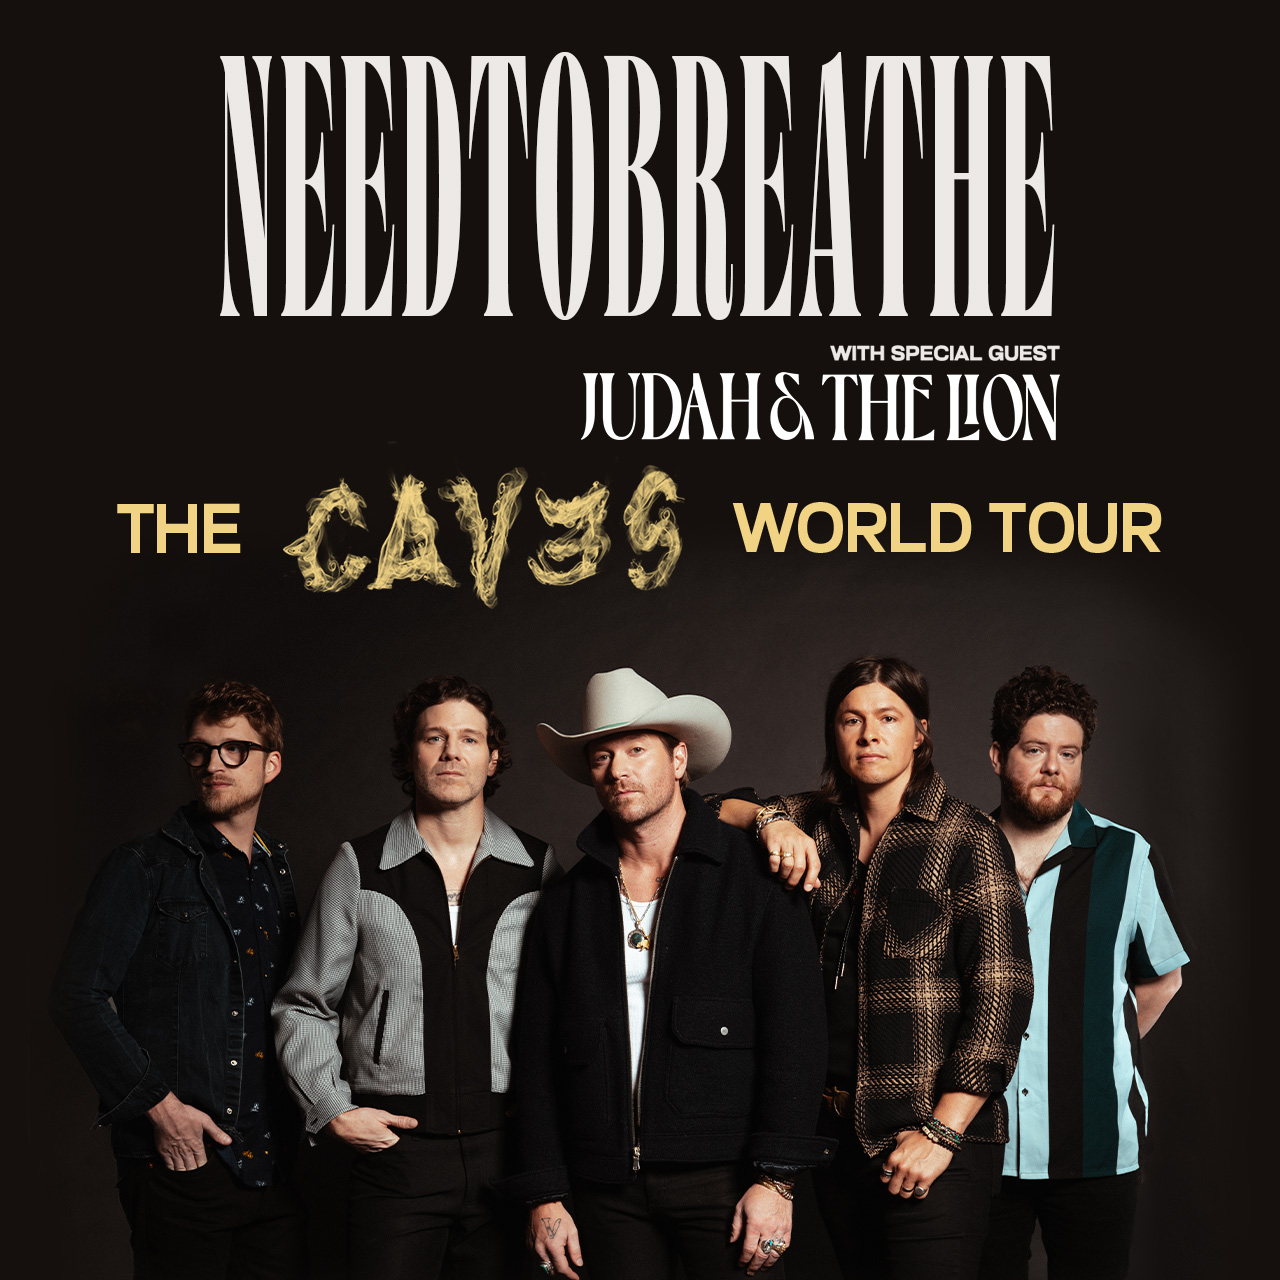 THE CAVES WORLD TOUR